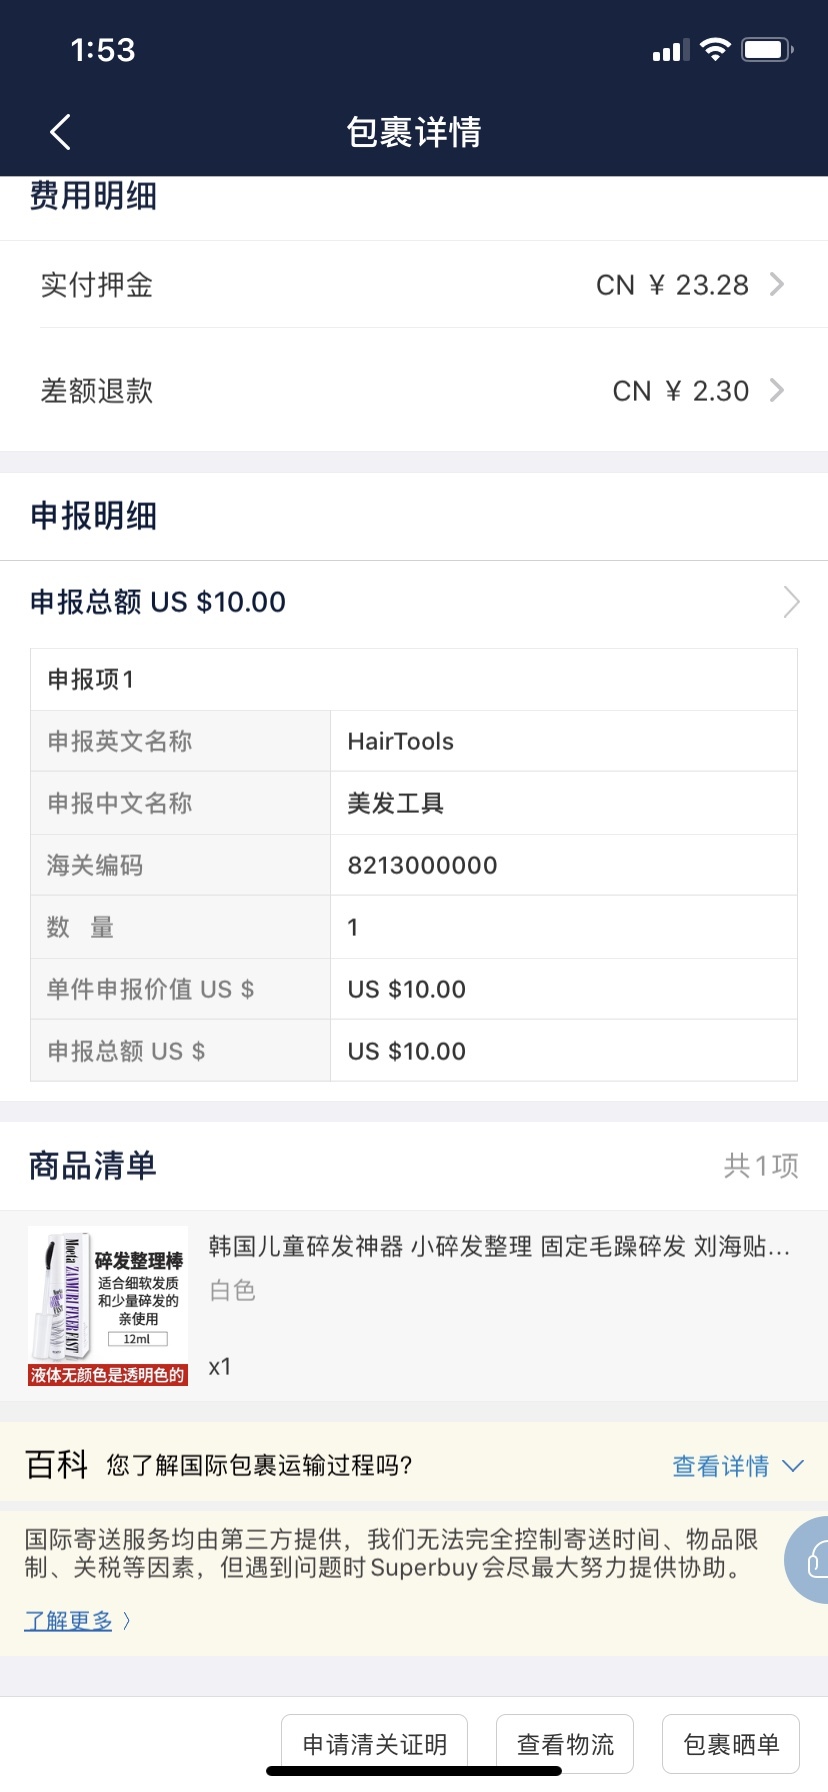 https://img1.superbuy.com/images/consult/2020/08/09/042bd45f1ff3933863348cee39d7d031.jpg?x-oss-process=image/resize,w_950